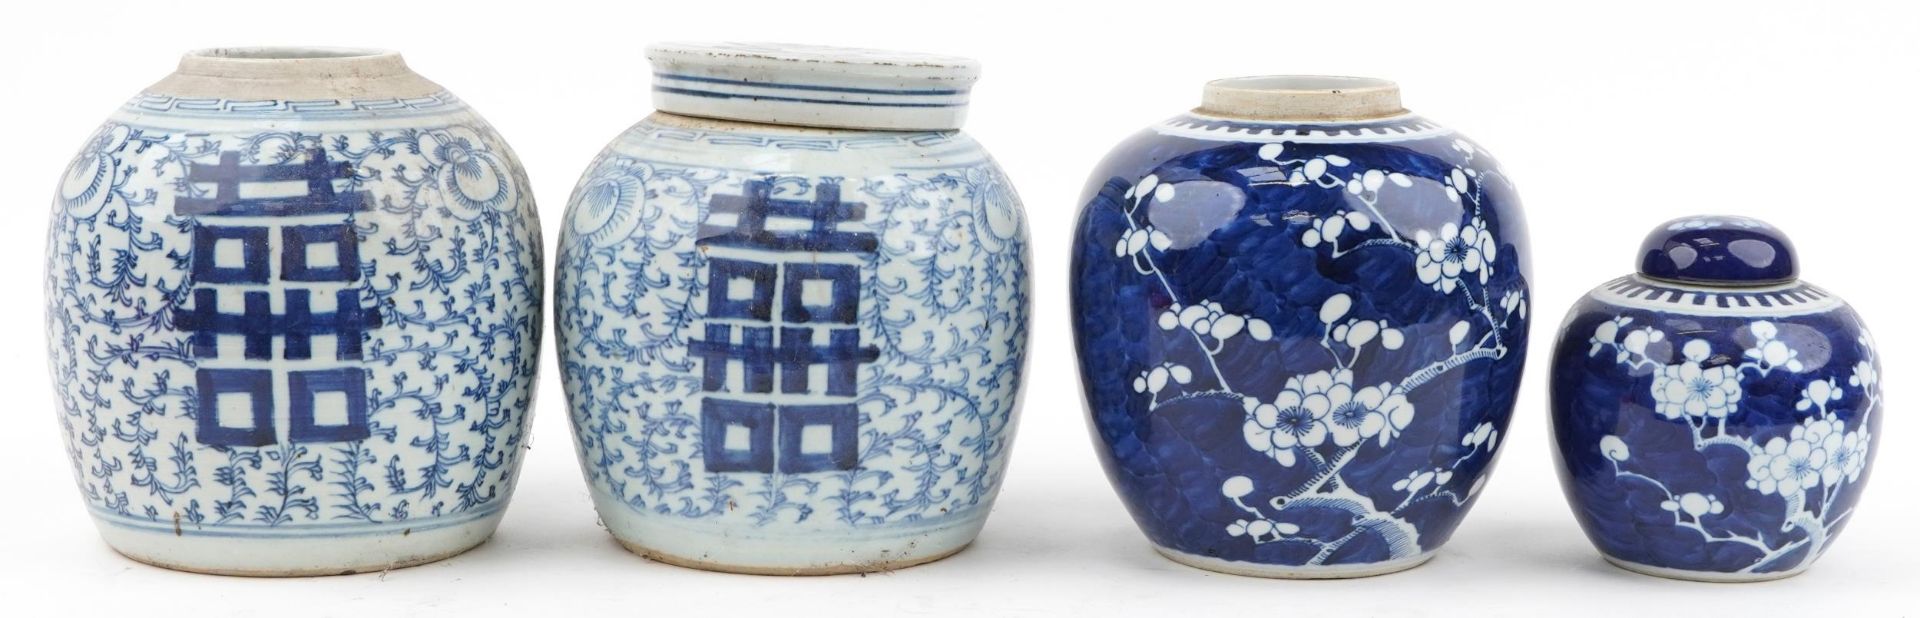 Four Chinese blue and white porcelain ginger jars including two hand painted in the prunus